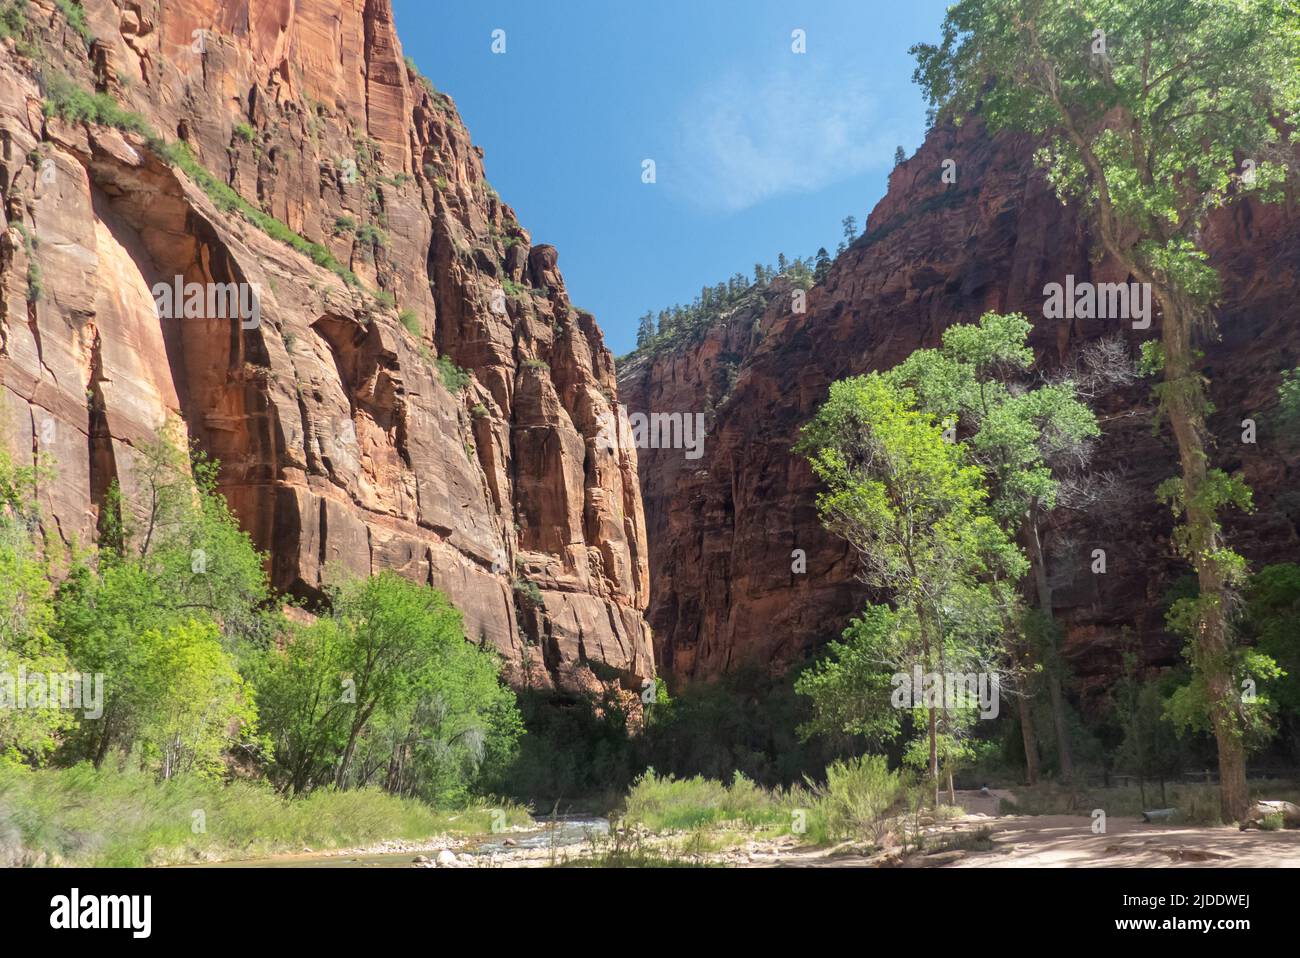 Zion NP in Utah, USA: The canyon and the Virgin River. Stock Photo